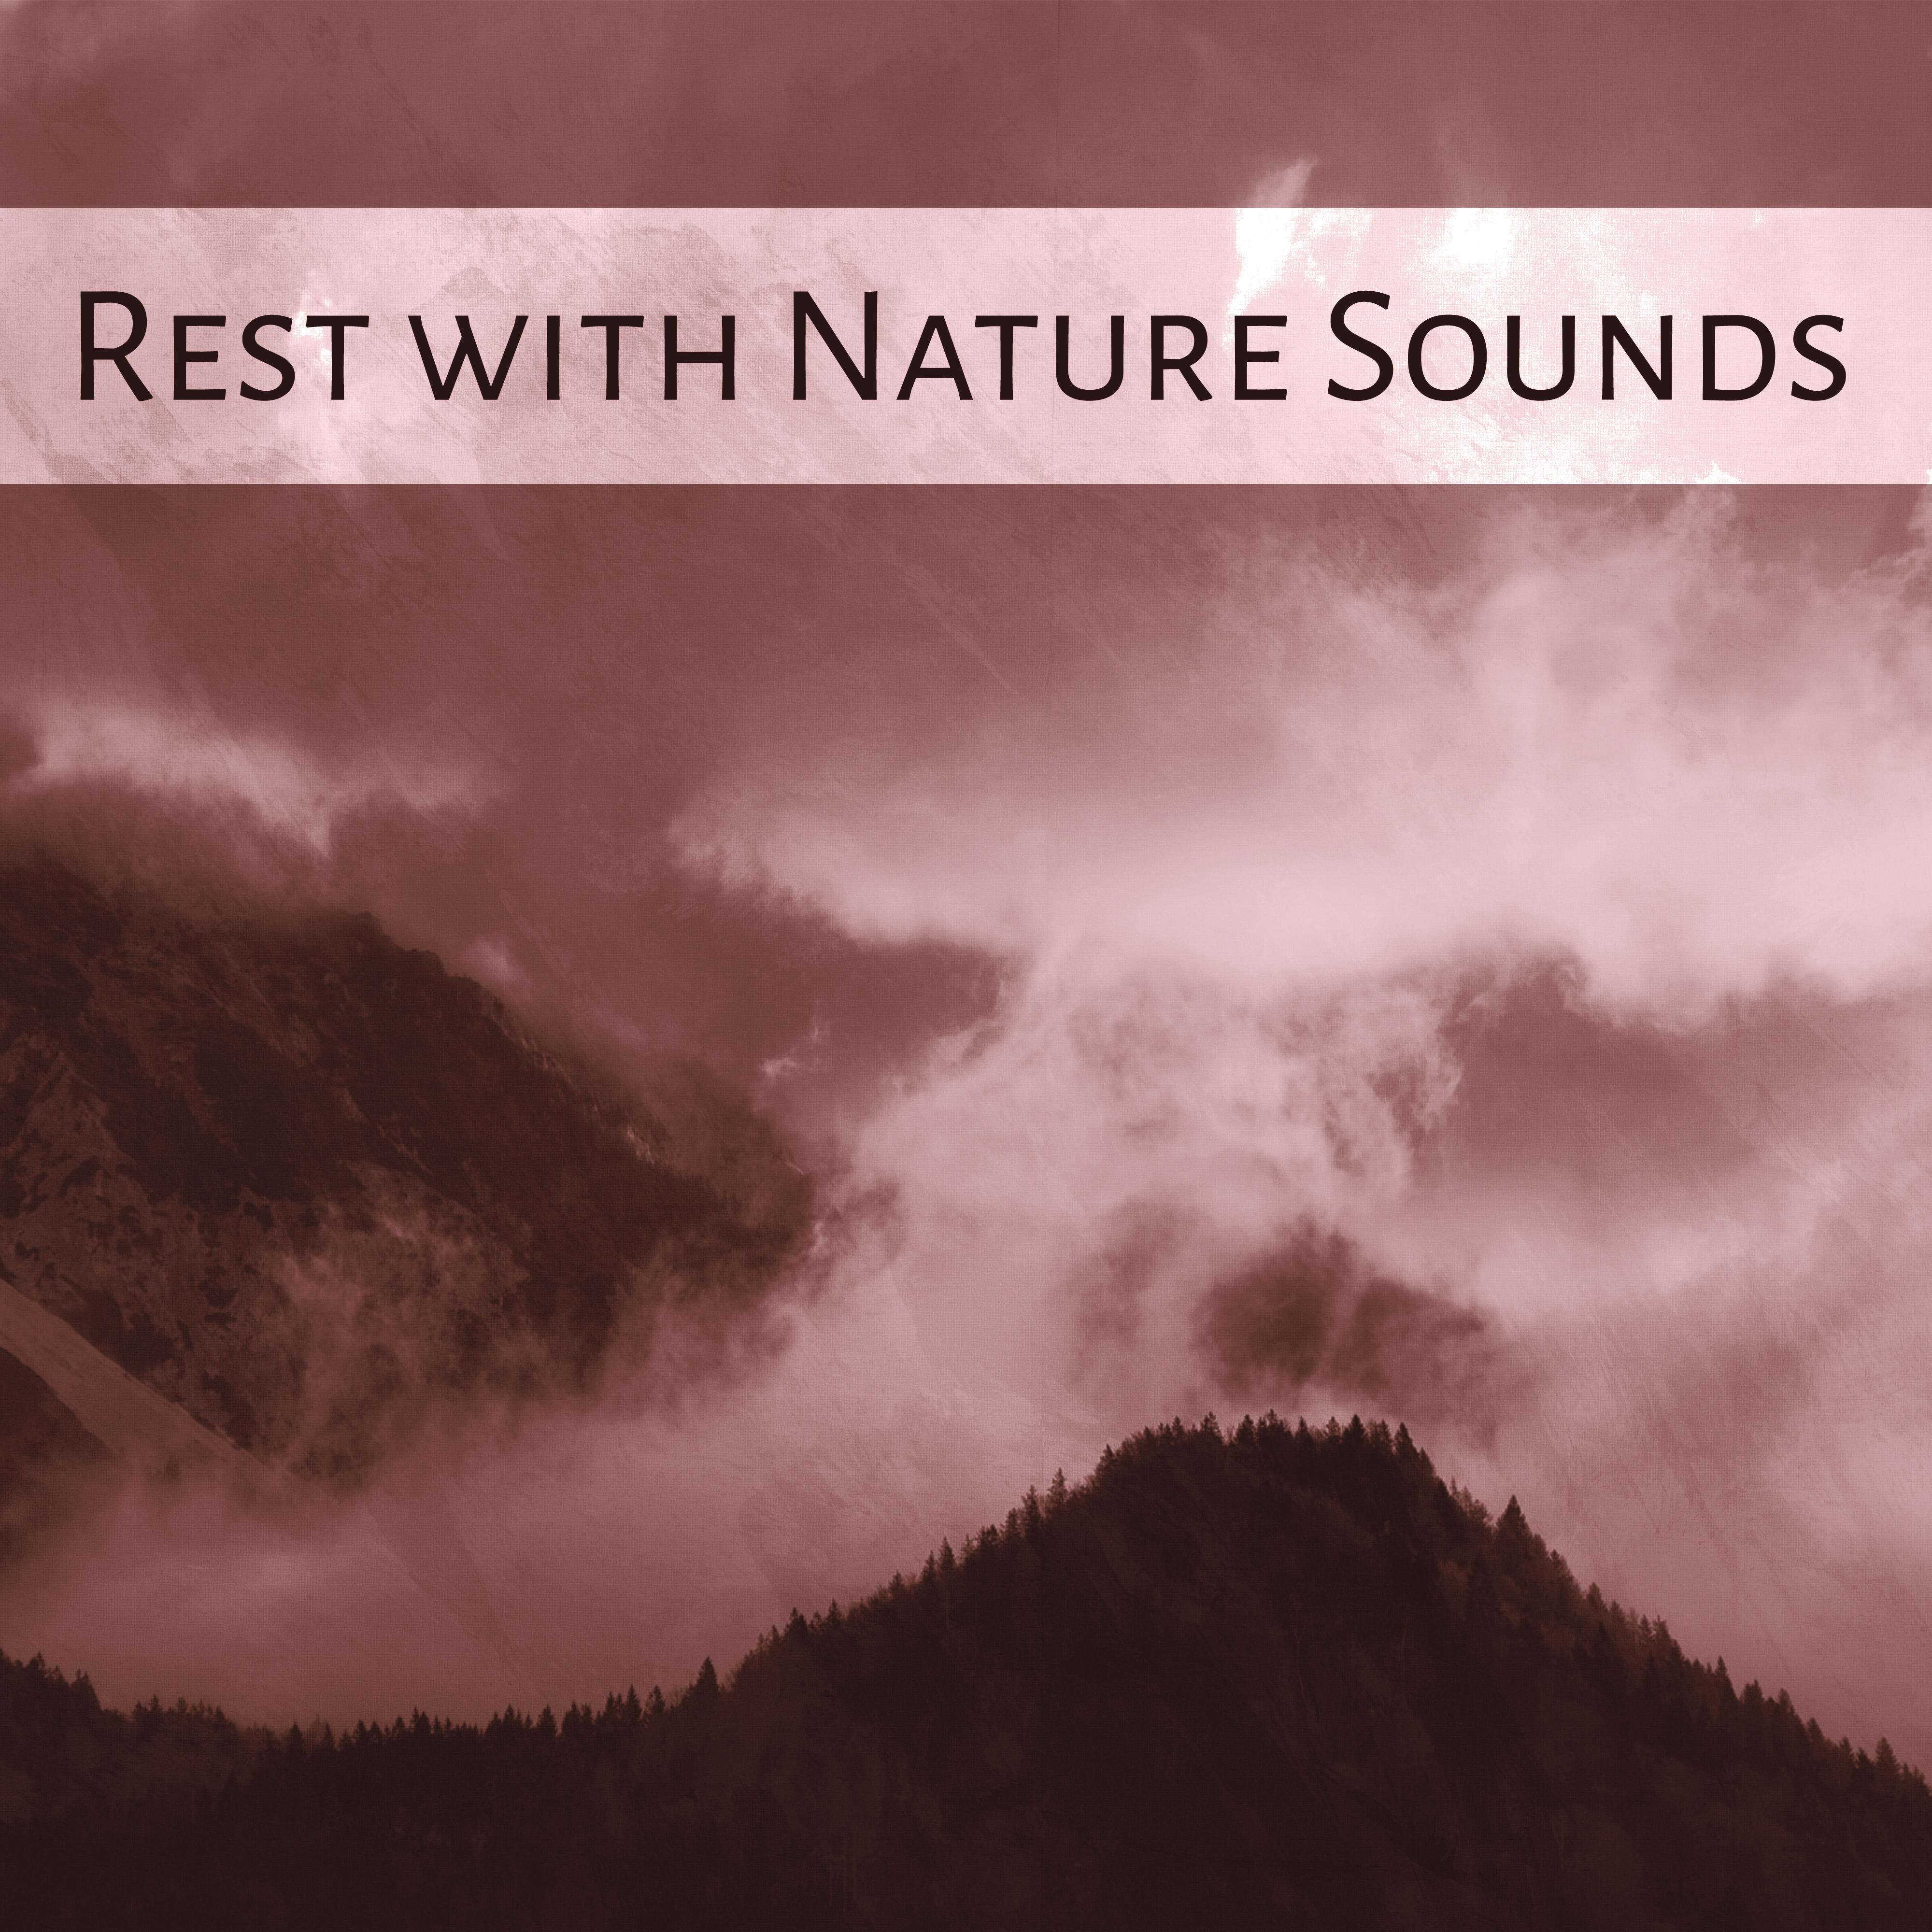 Rest with Nature Sounds  Calming Waves, Stress Relief, Relax Yourself, New Age Sounds, Harmony, Peaceful Mind